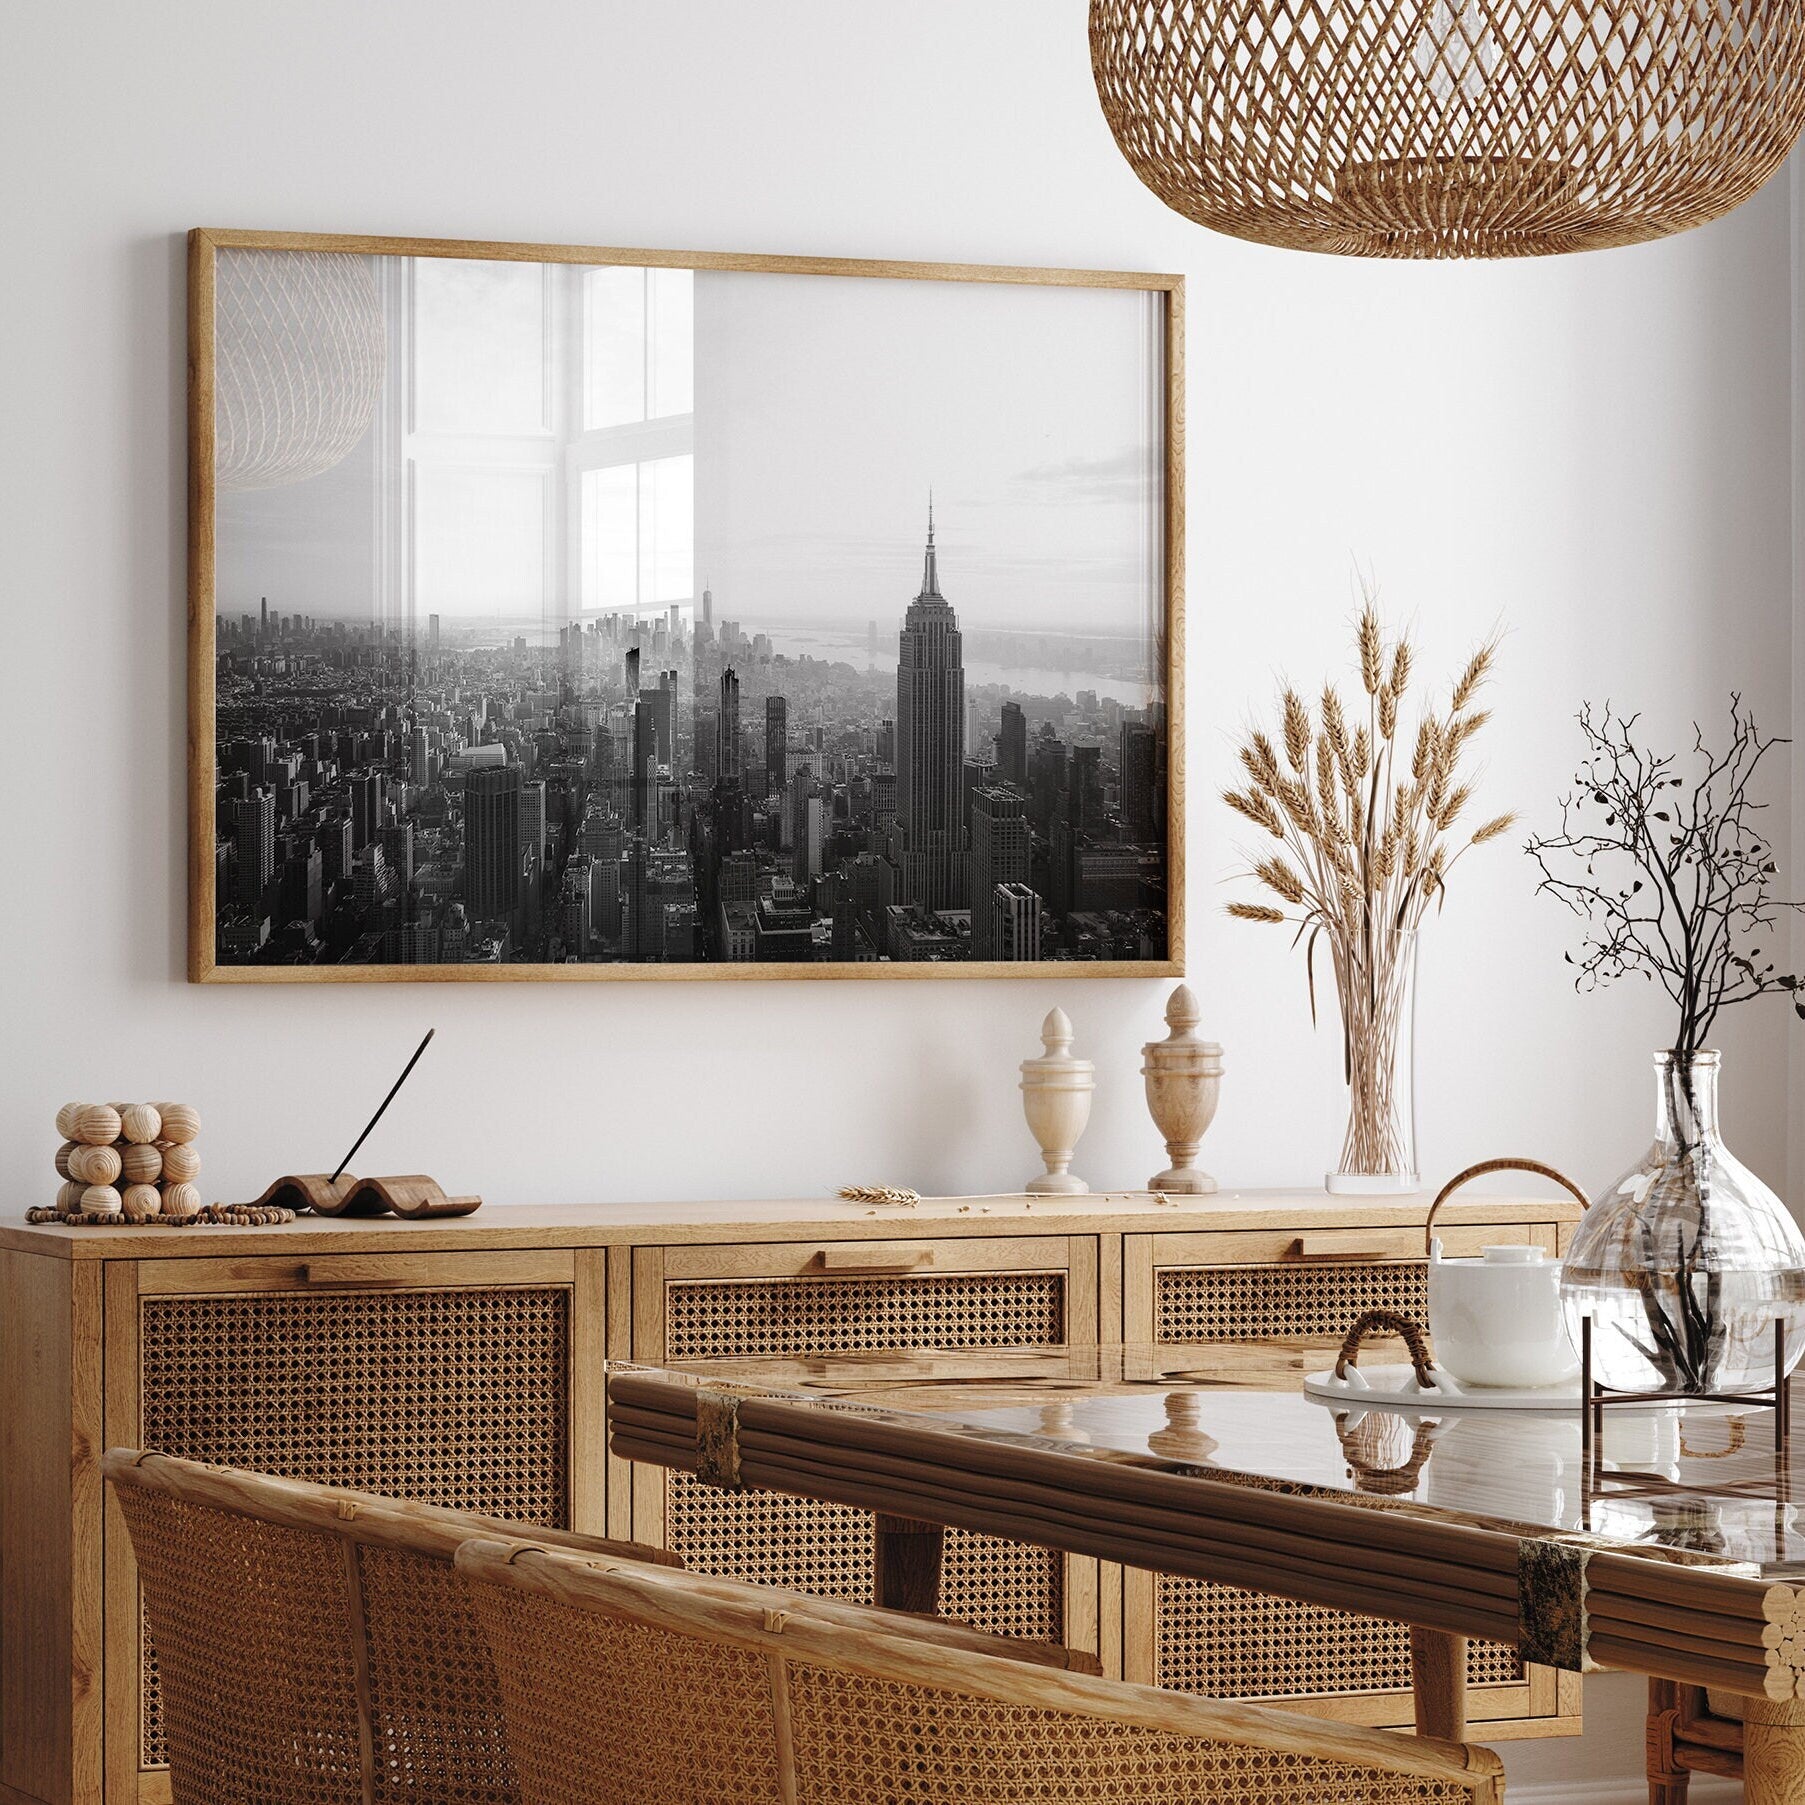 NYC Blackwhite Photography Empire State Building Skyscraper Print Large NYC Wall Art Classic Manhattan Poster Iconic Photo Print NYC Skyline